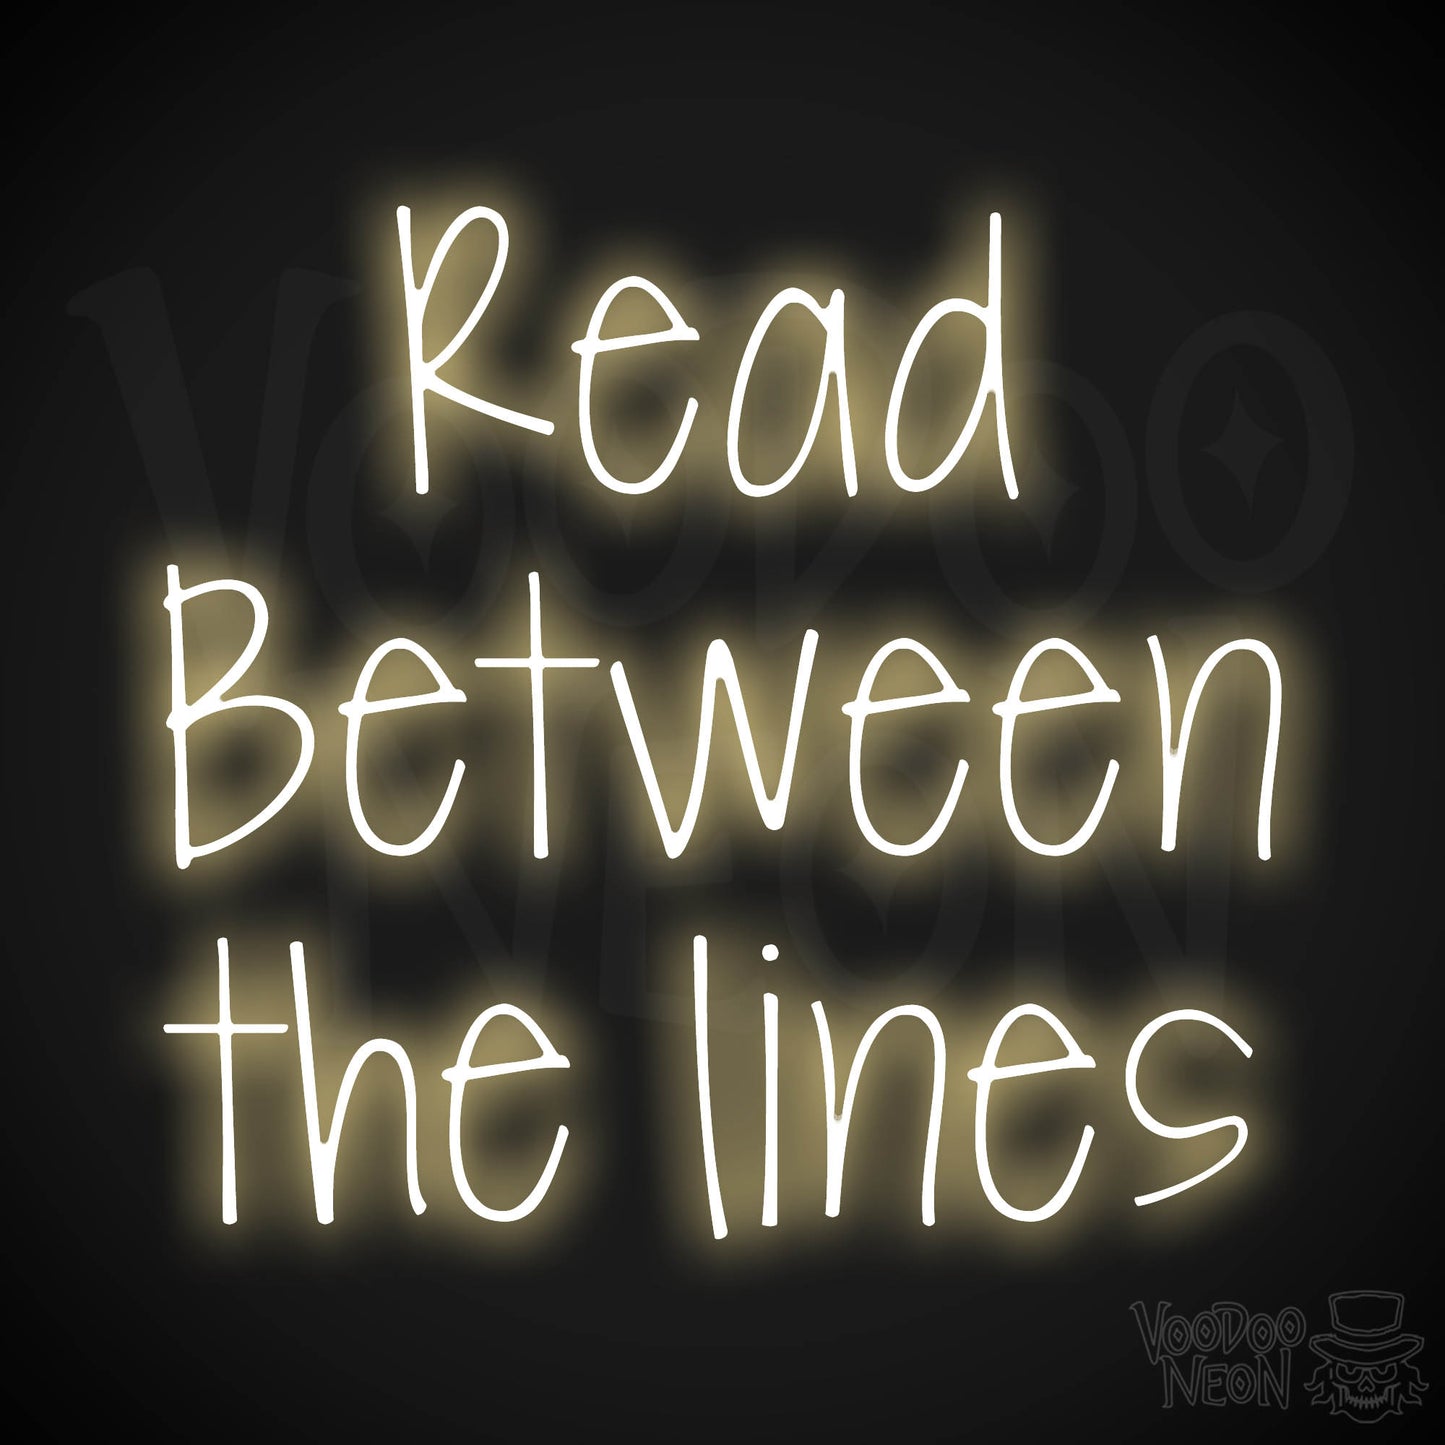 Read Between The Lines LED Neon - Warm White